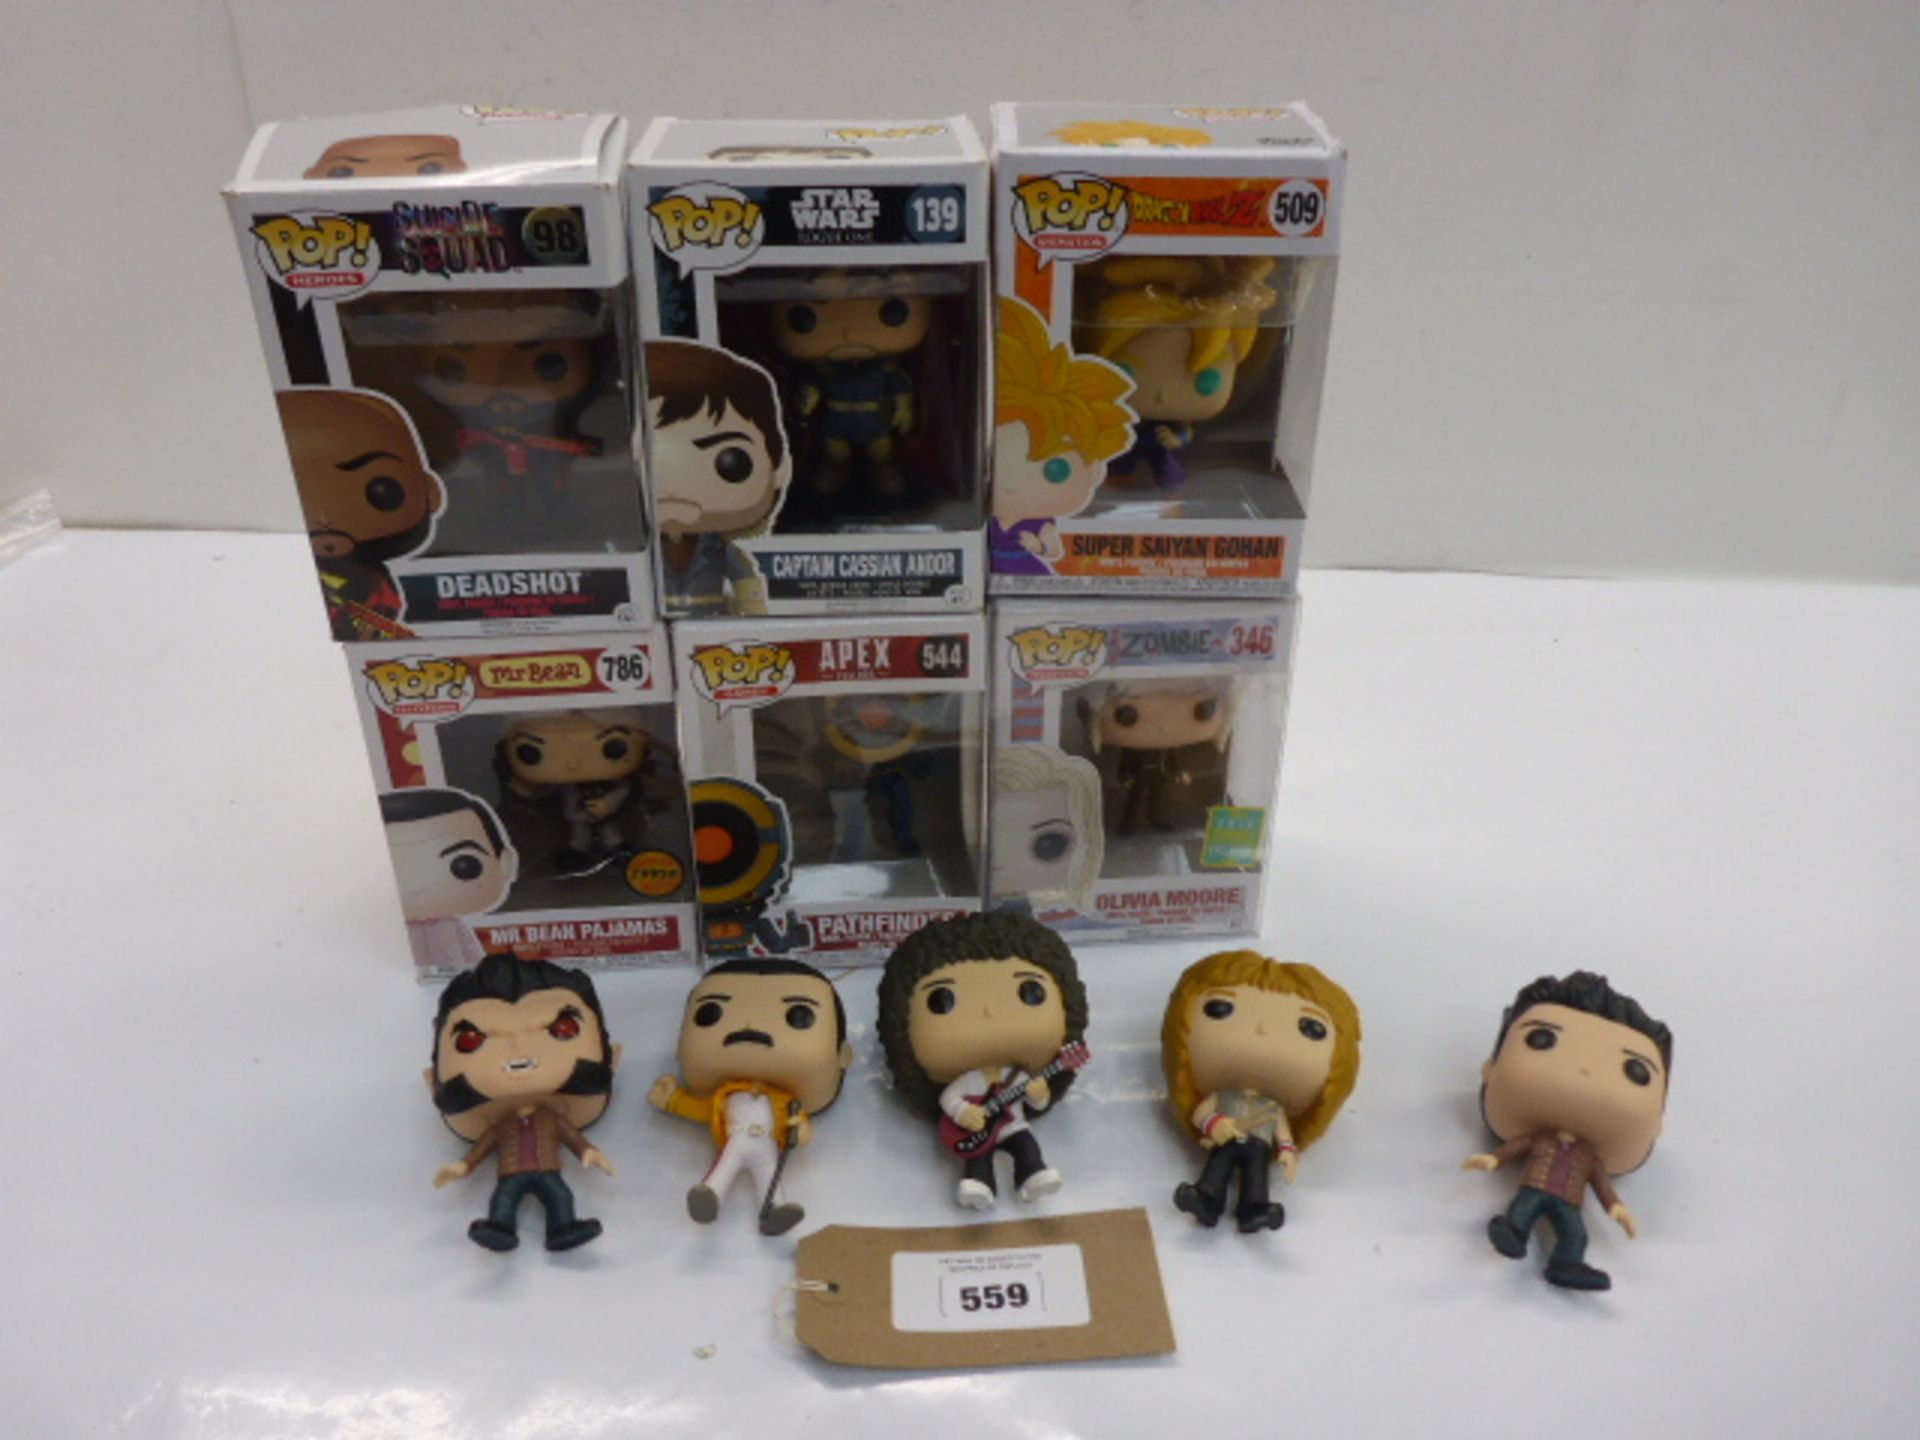 6 x Boxed Pop! vinyl collectable figures including Star Wars, Zombie, Apex etc and 5 Pop! unboxed